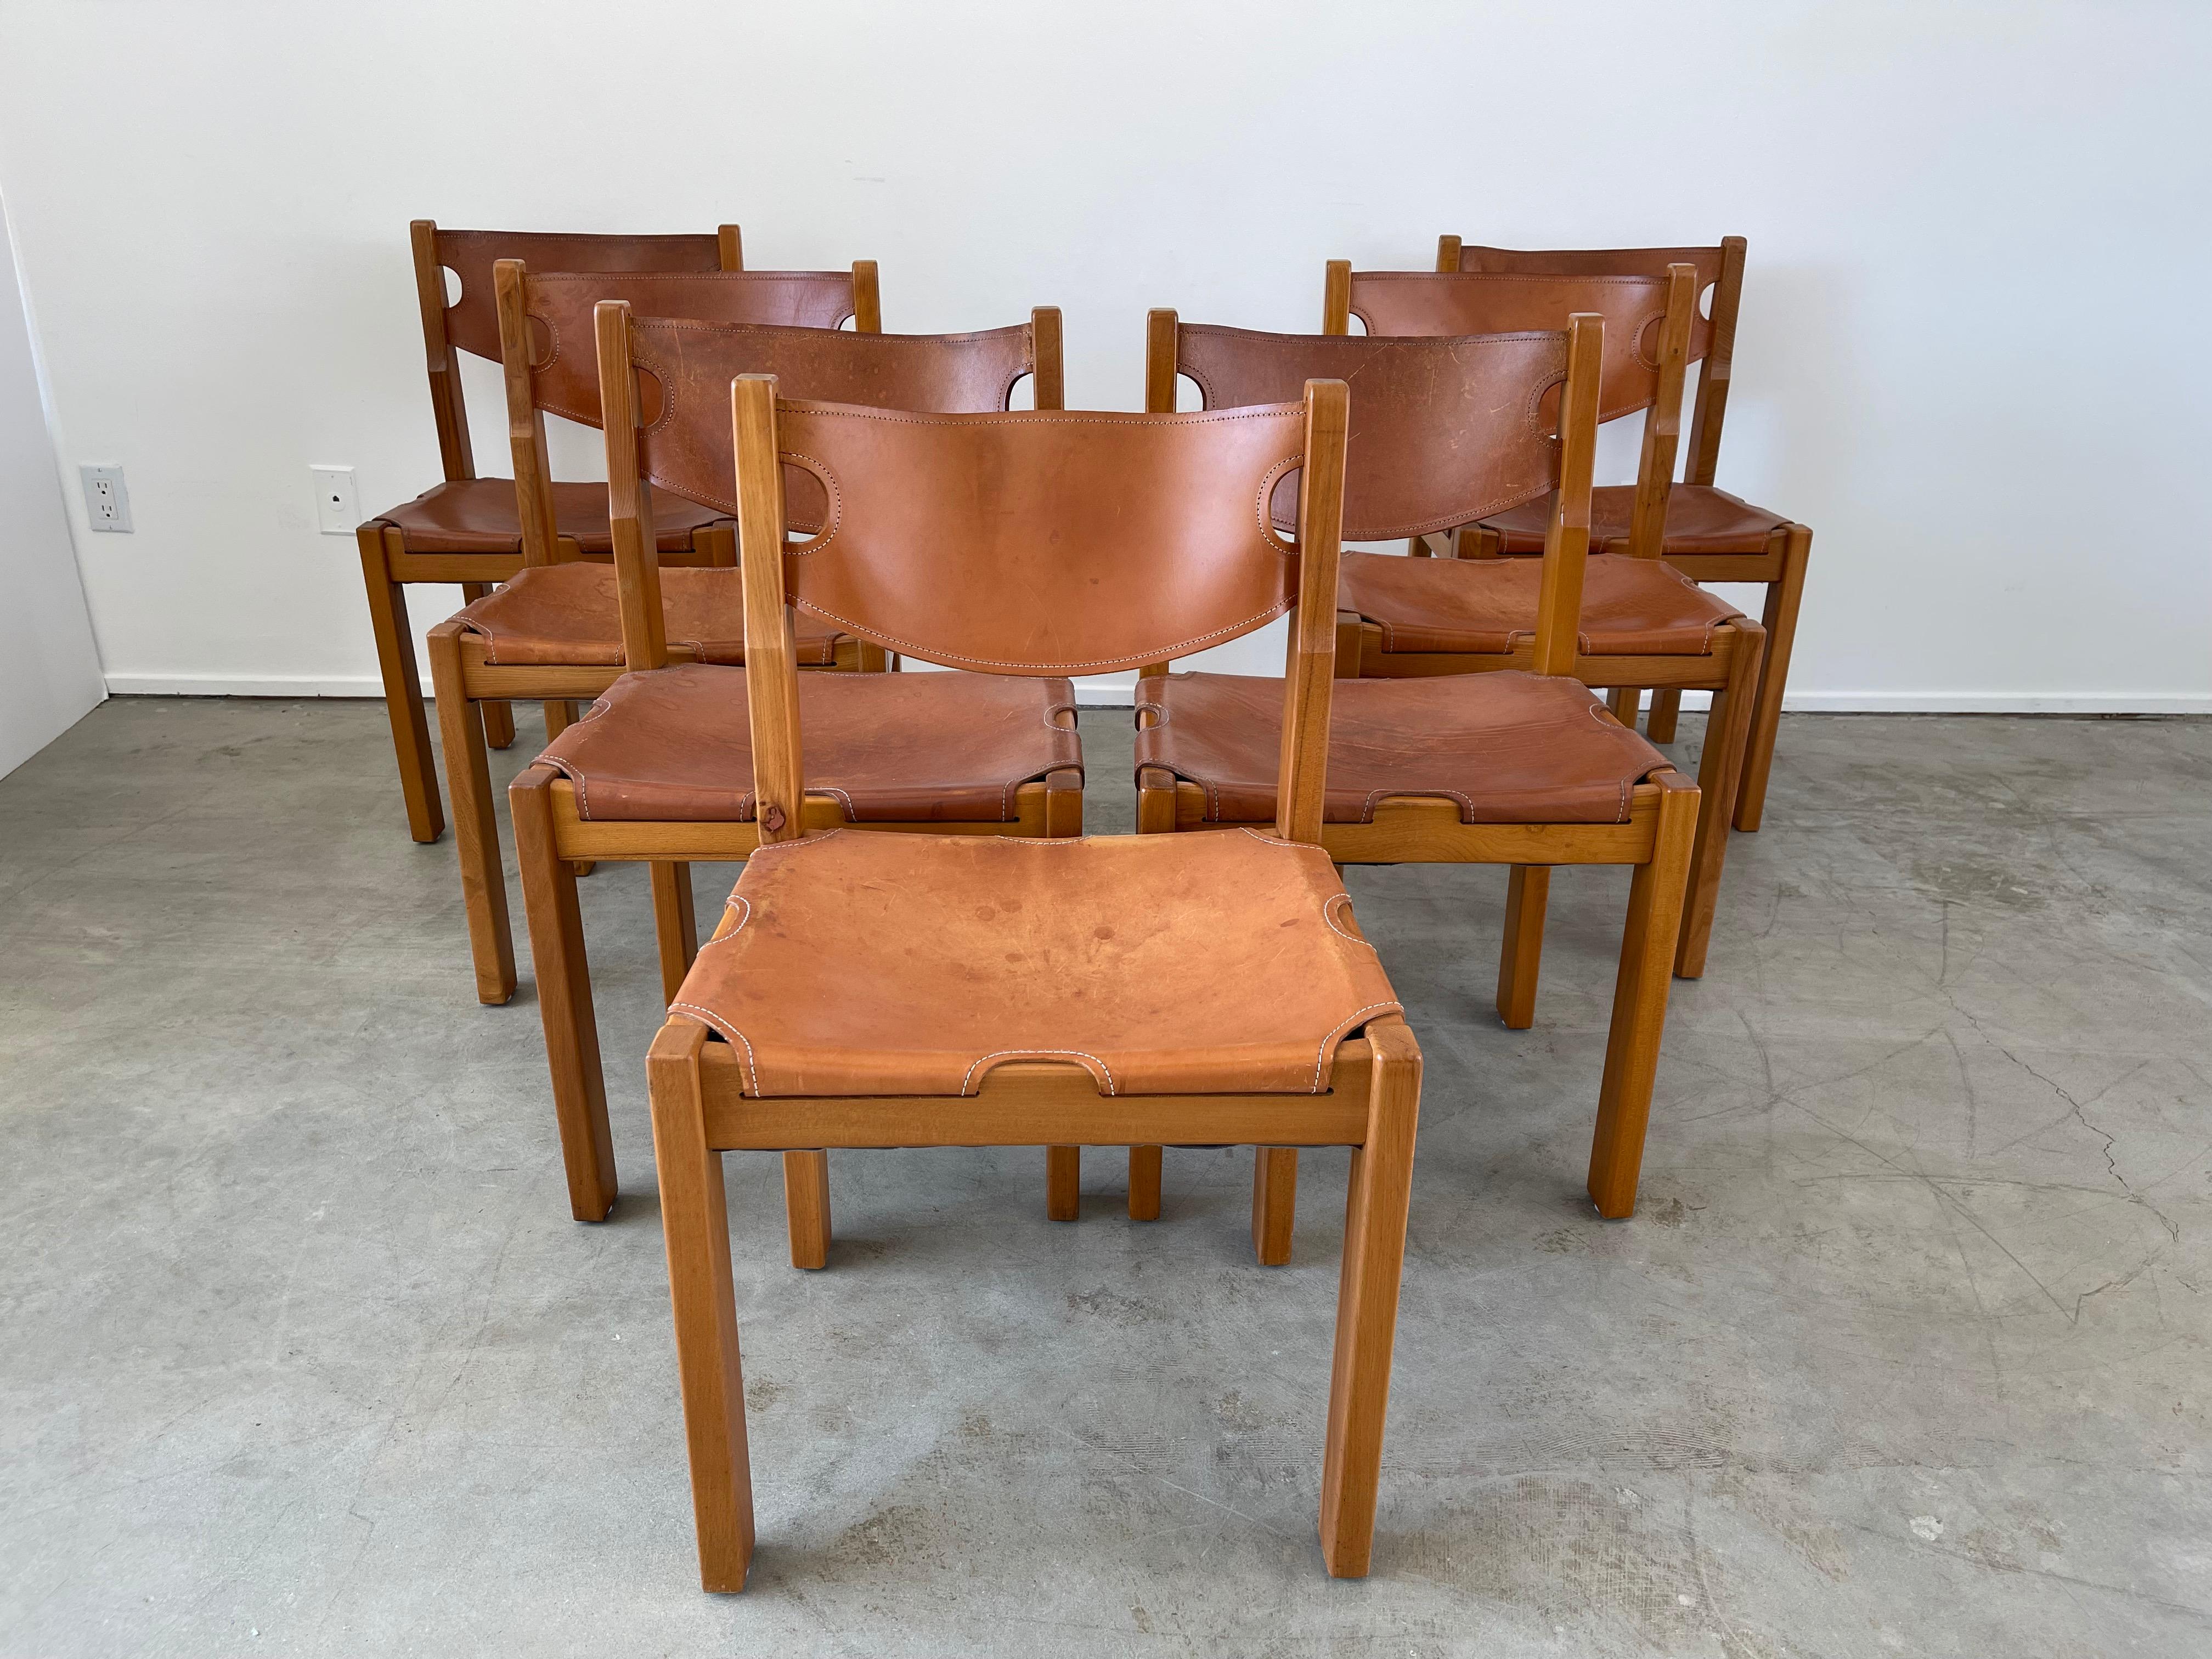 Maison Regain leather and elm wood chairs
Great patina to leather and construction 
Priced individually. 

